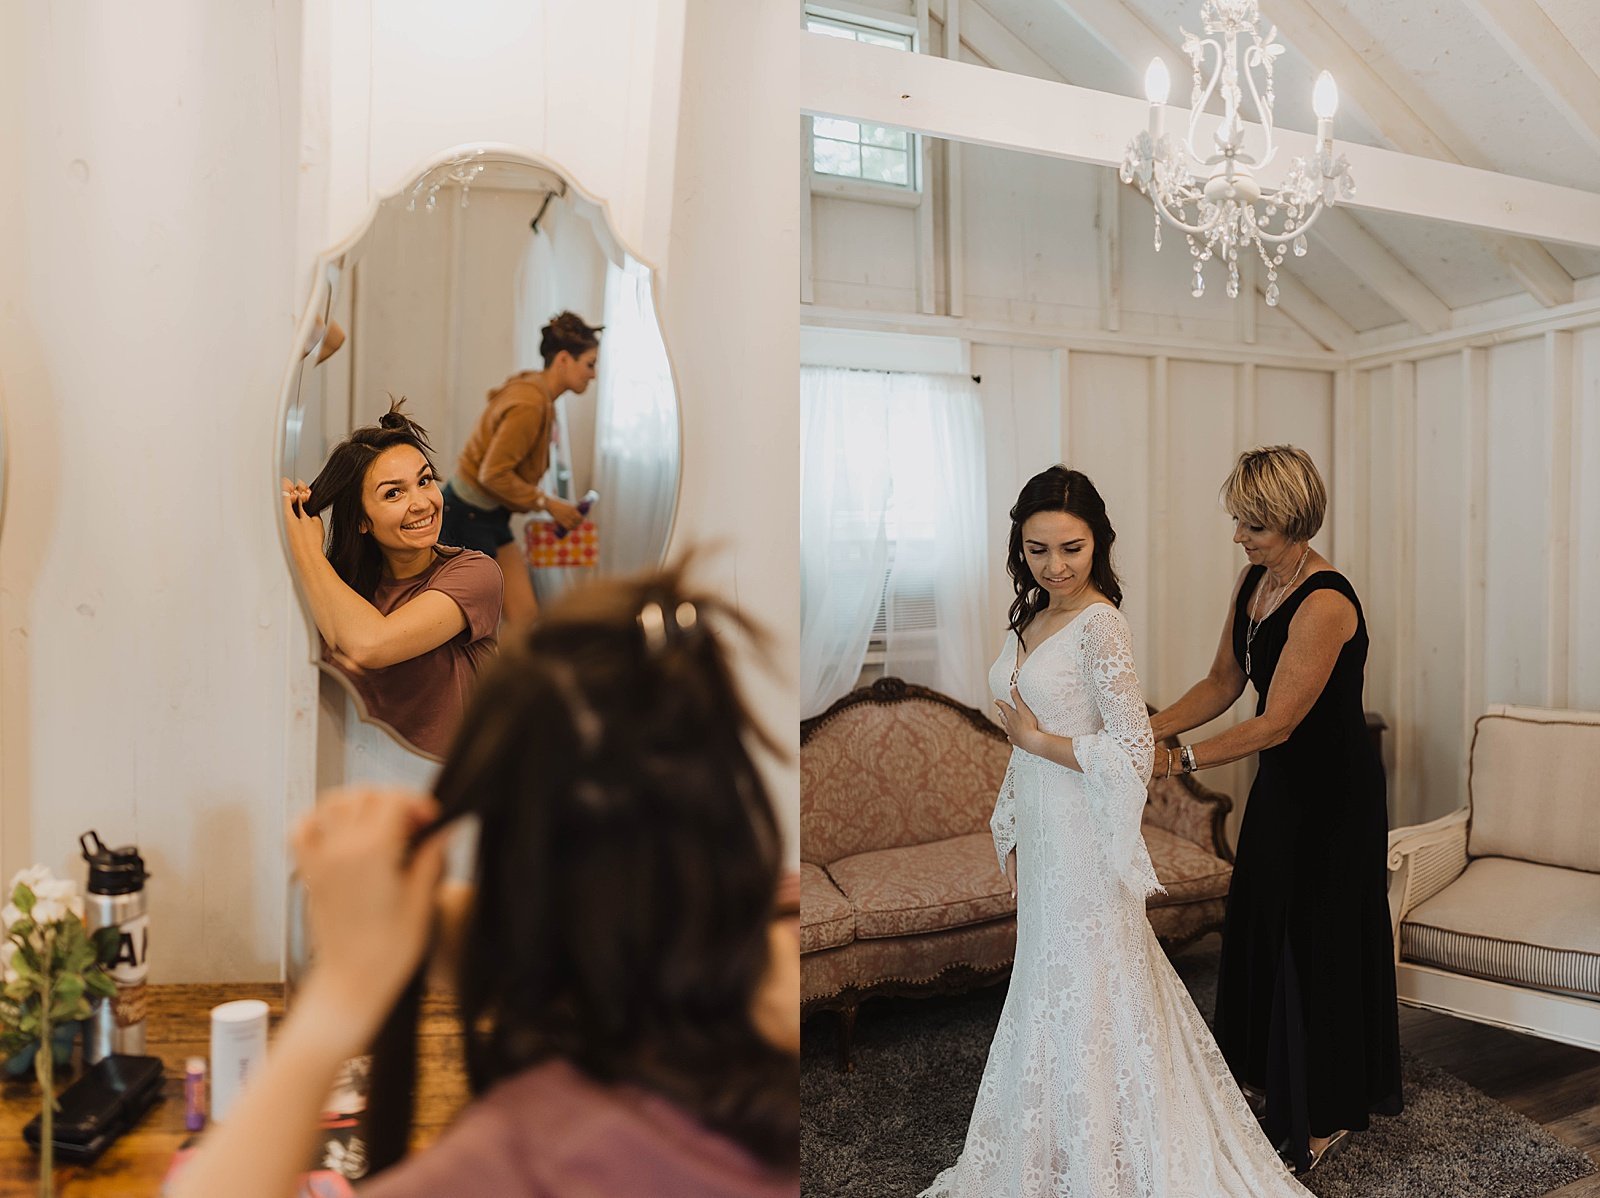  Bride getting ready before her anchorage wedding by photographer Theresa McDonald.  